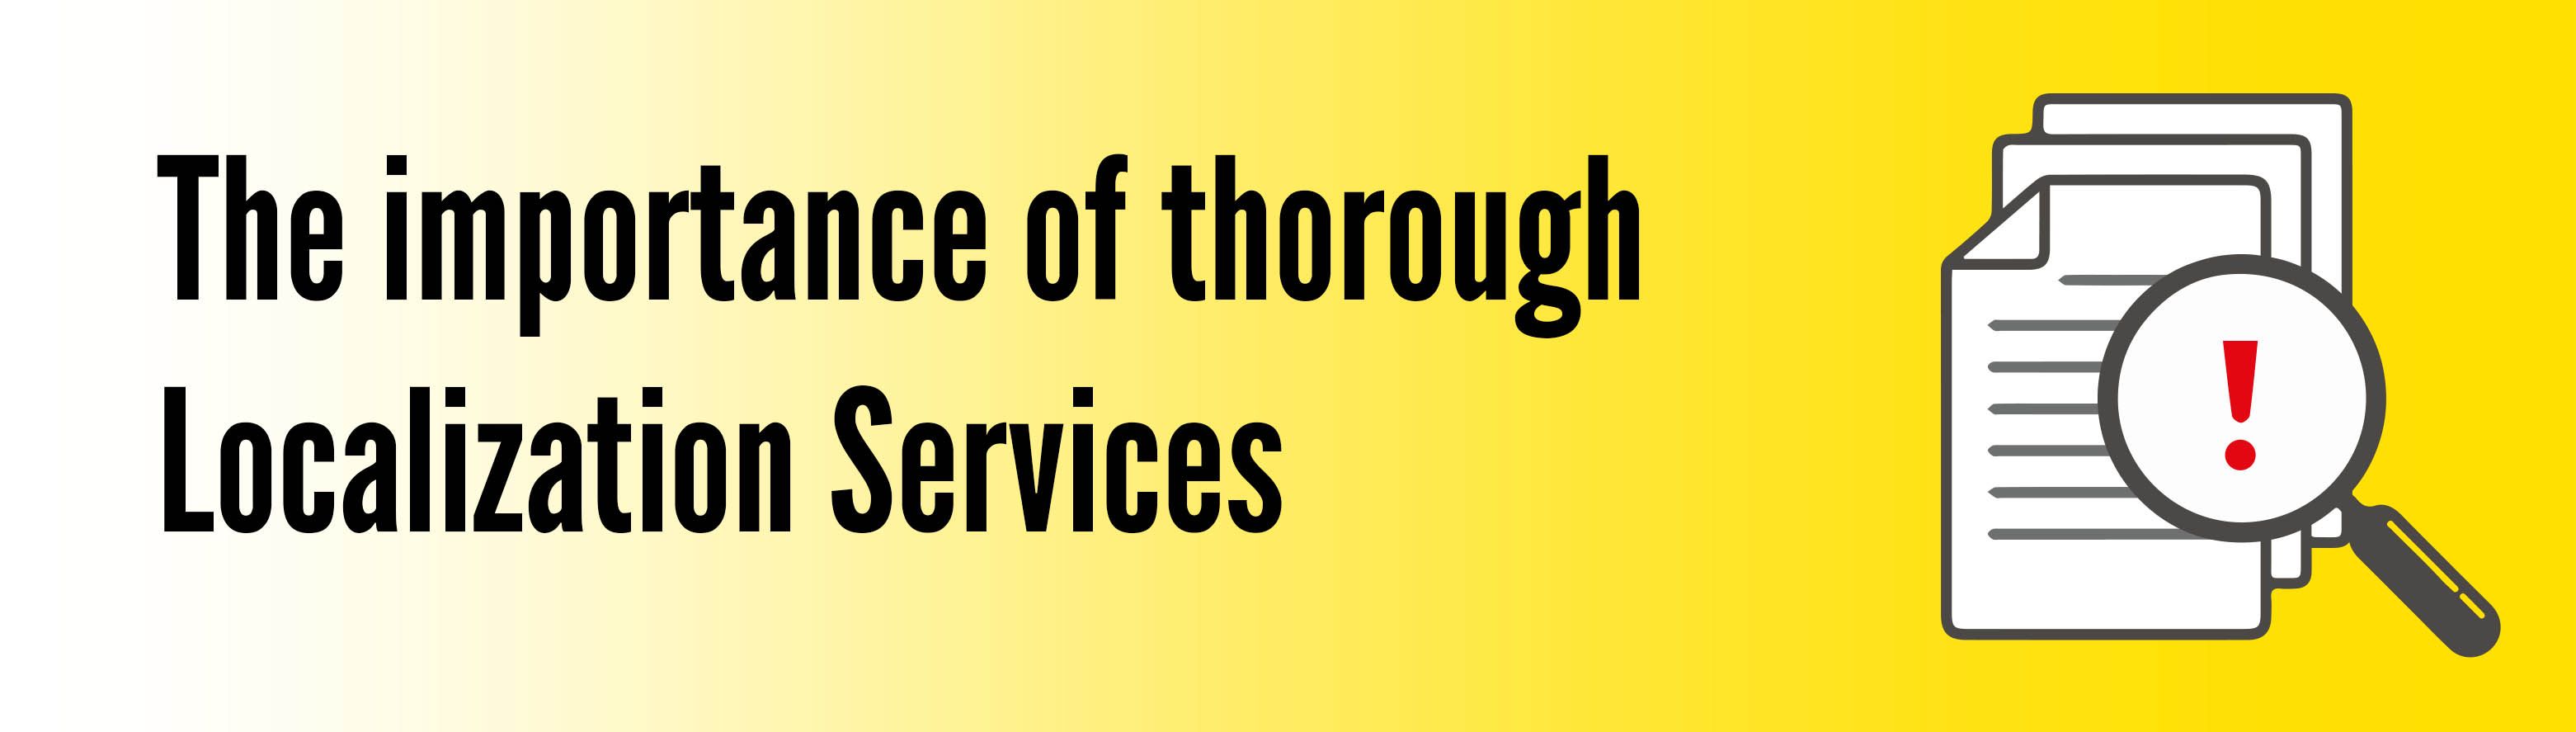 The importance of Thorough Localization Services